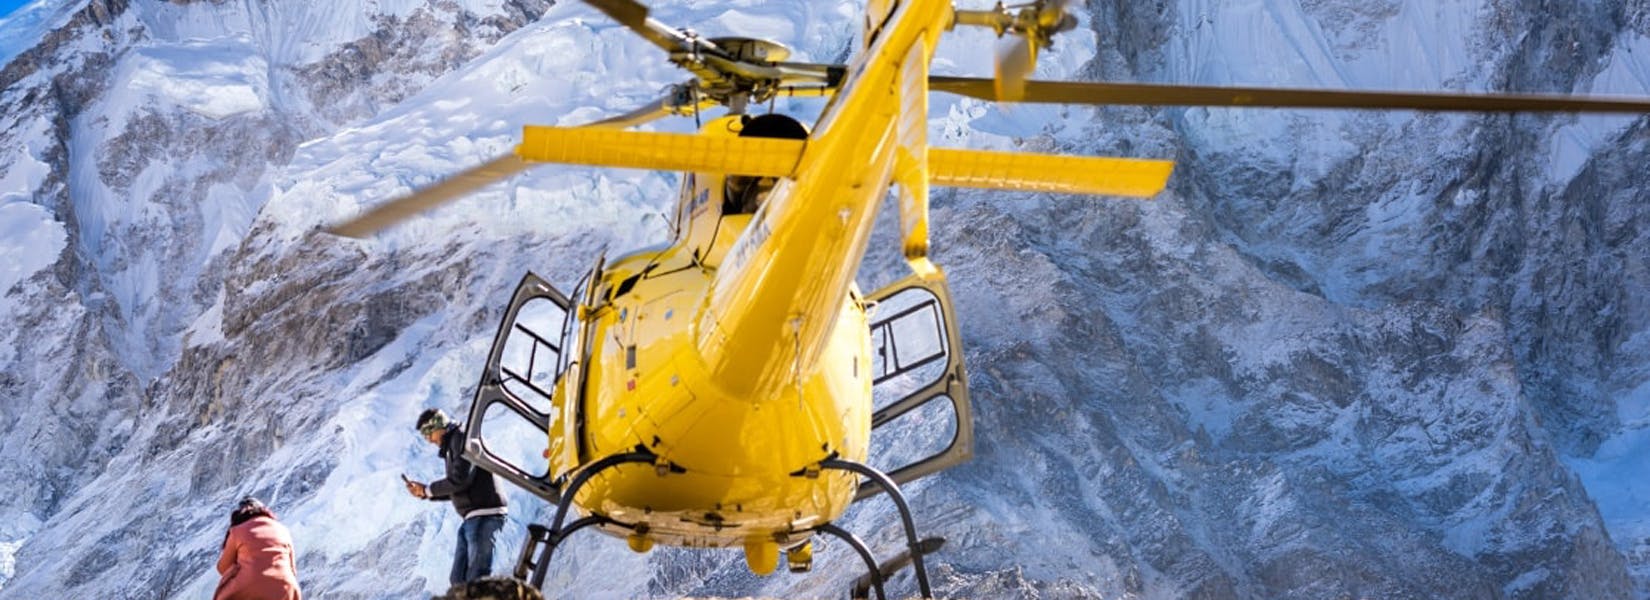 Everest Base Camp Helicopter Tour - <span class="font-light">4 hrs</span>